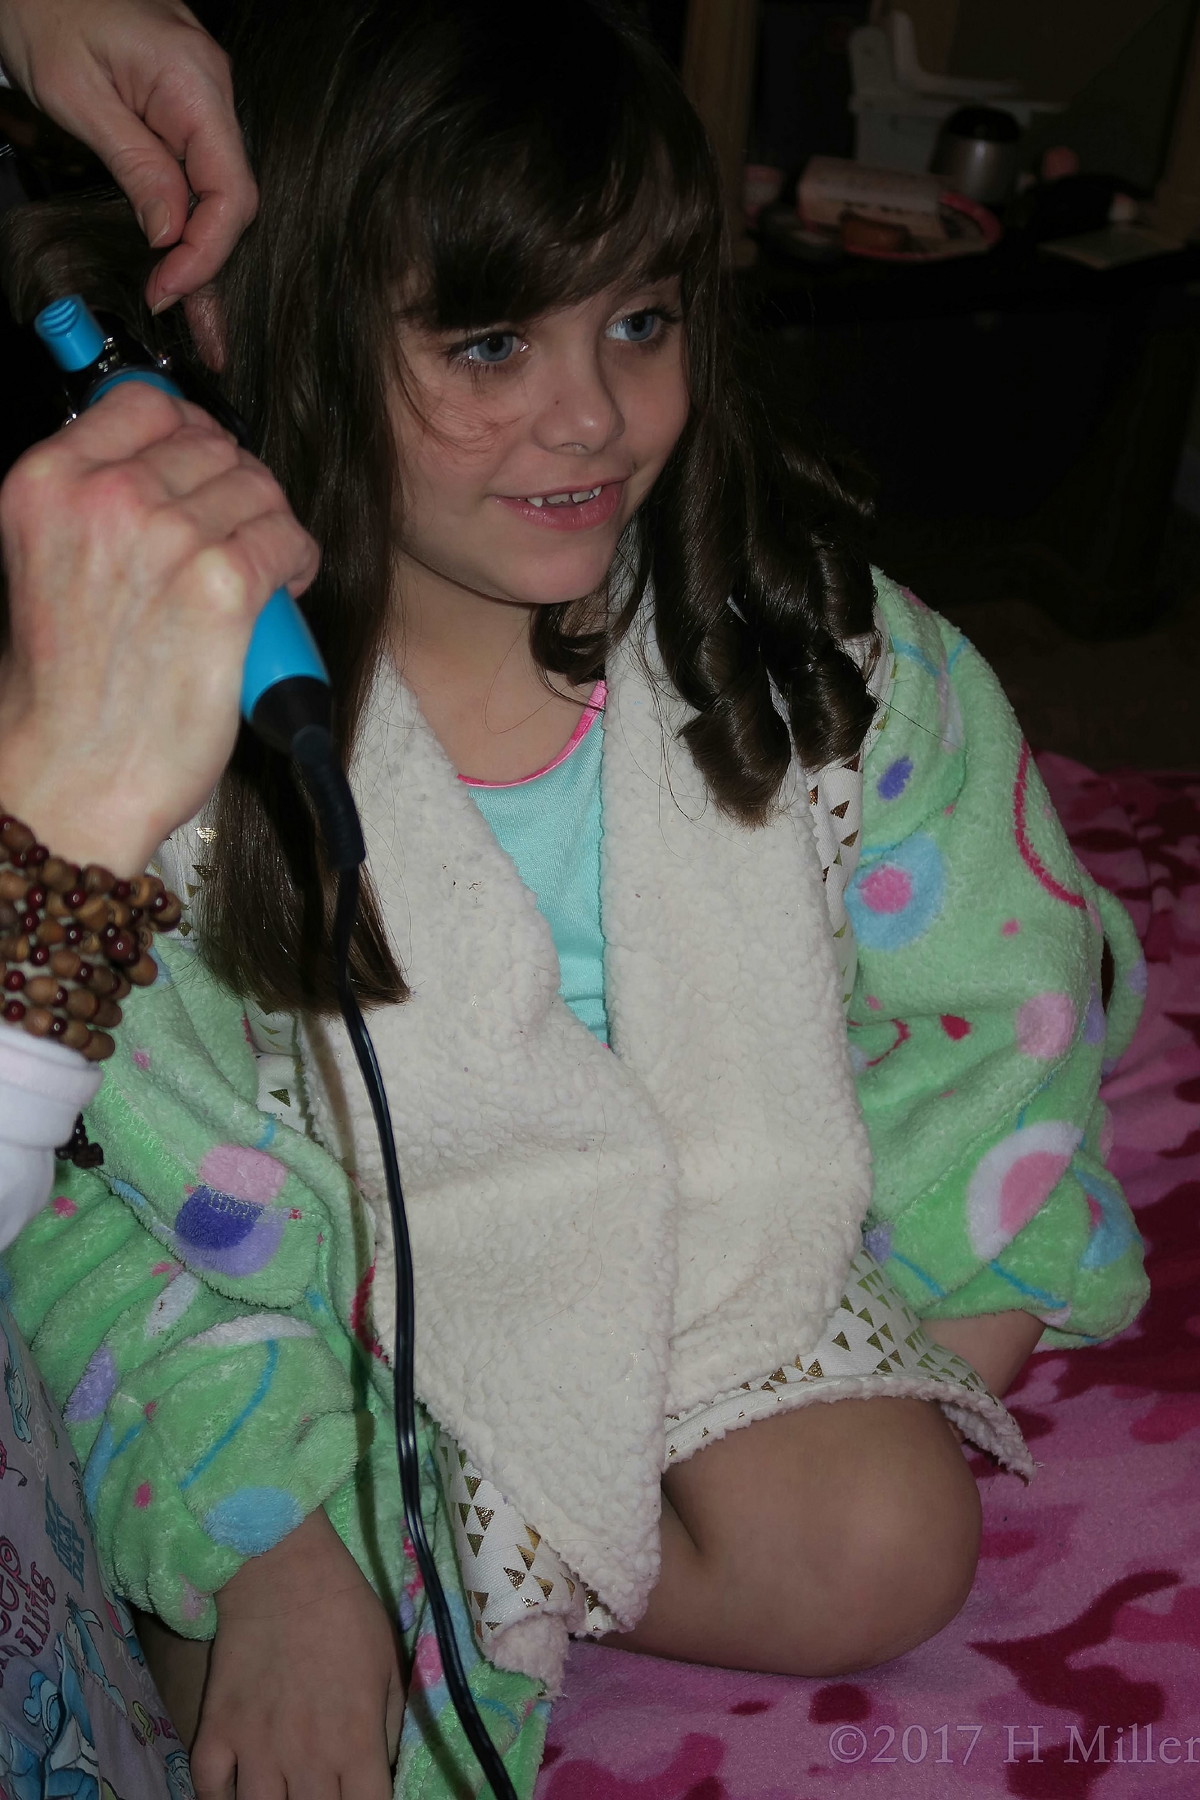 Hair Curling At The Girls Spa Birthday Party! 